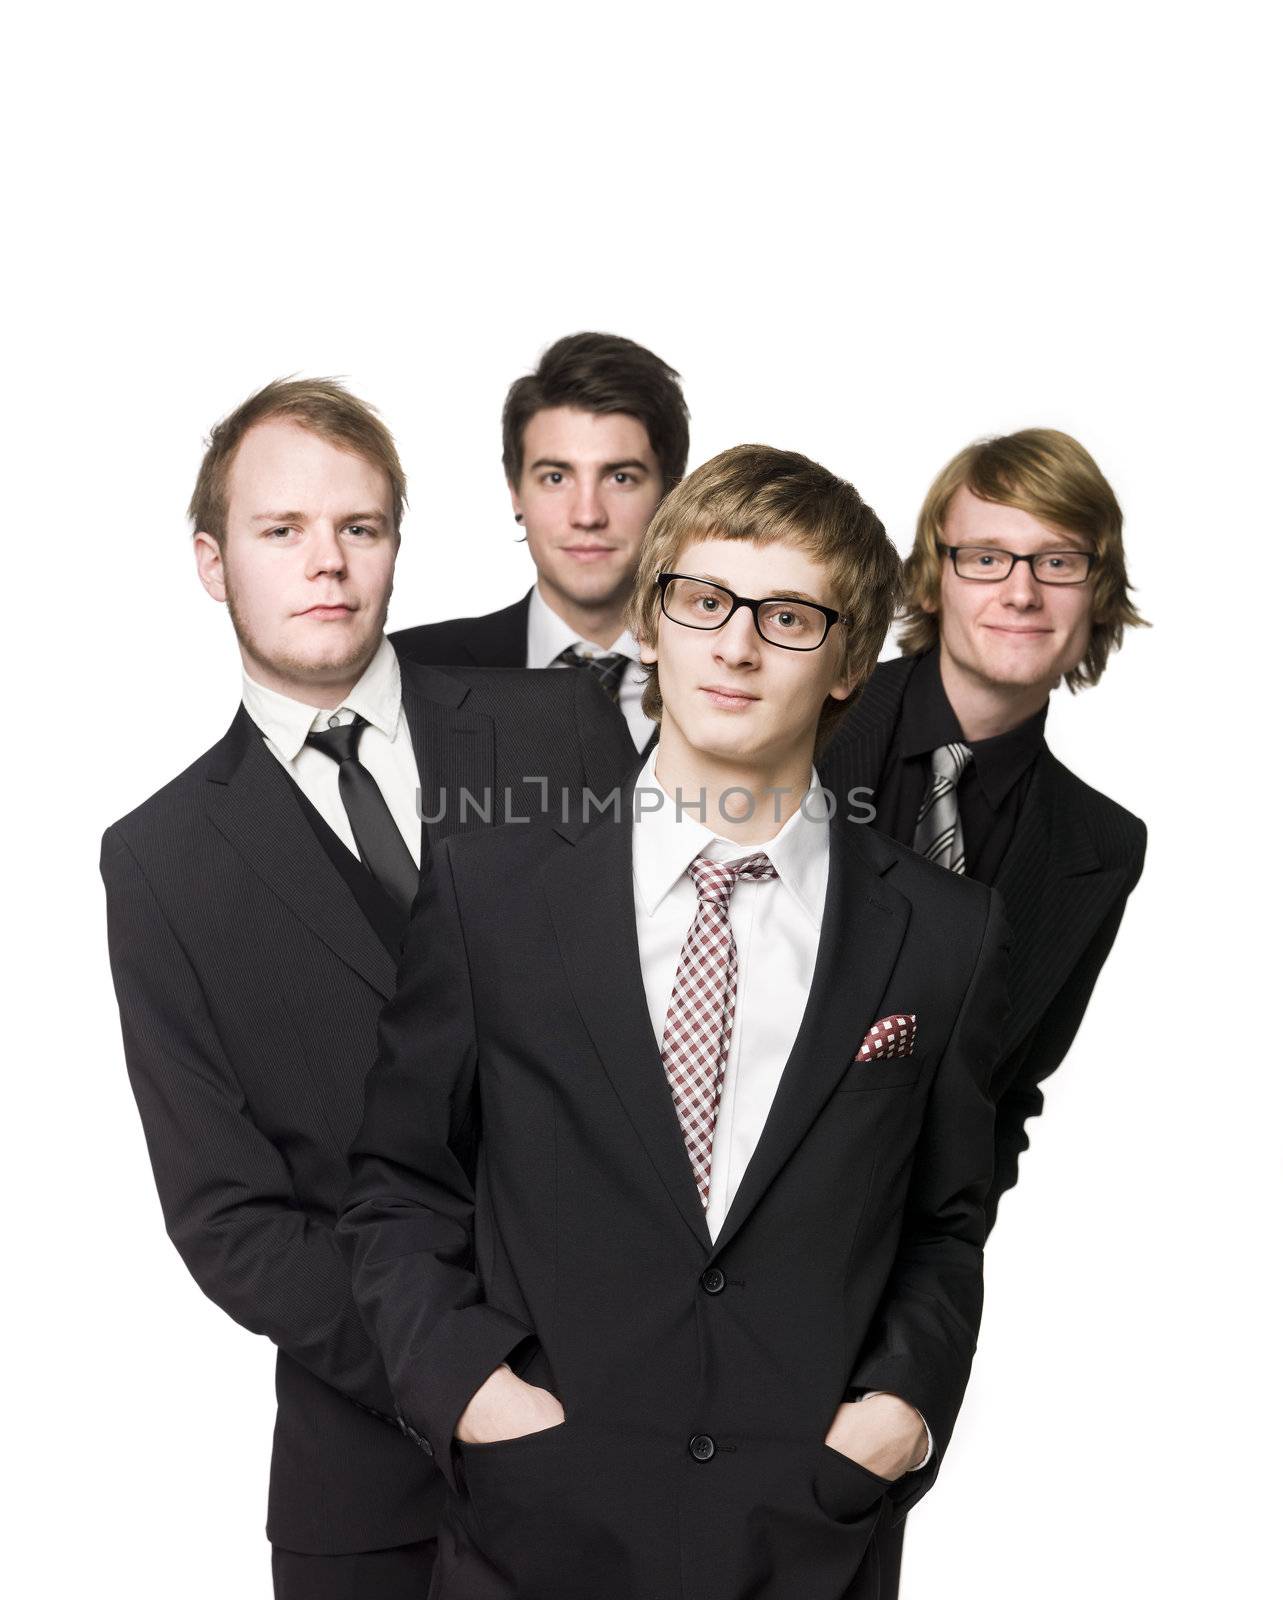 Four men with suits